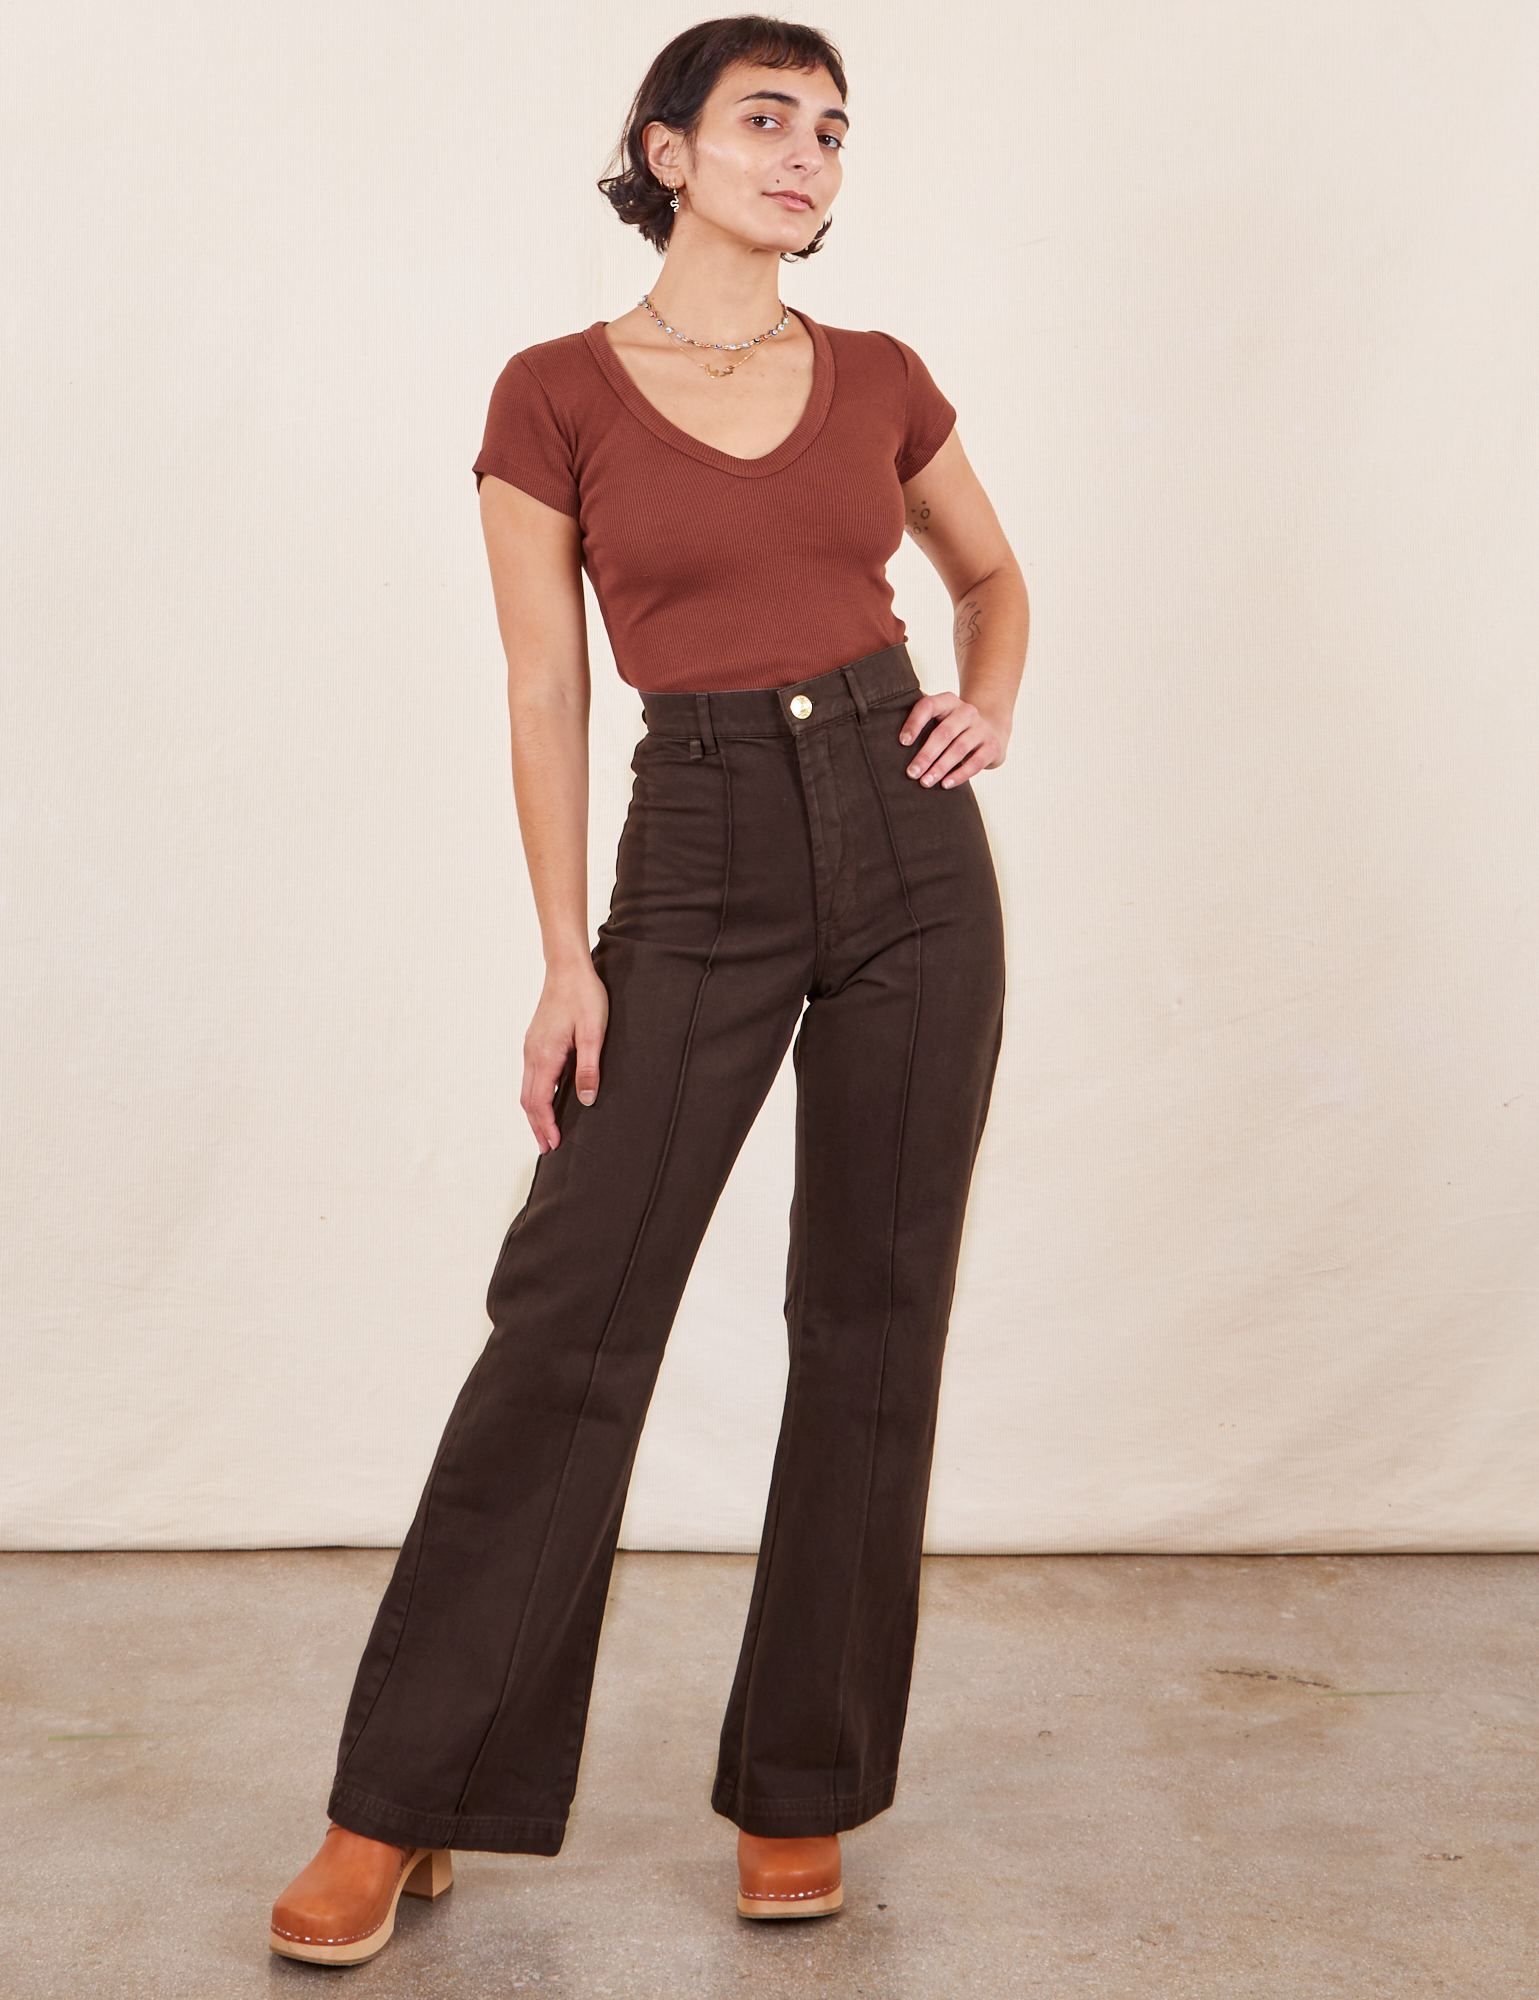 Soraya is 5&#39;2&quot; and wearing XXS Petite Western Pants in Espresso Brown paired with fudgesicle brown V-Neck Tee